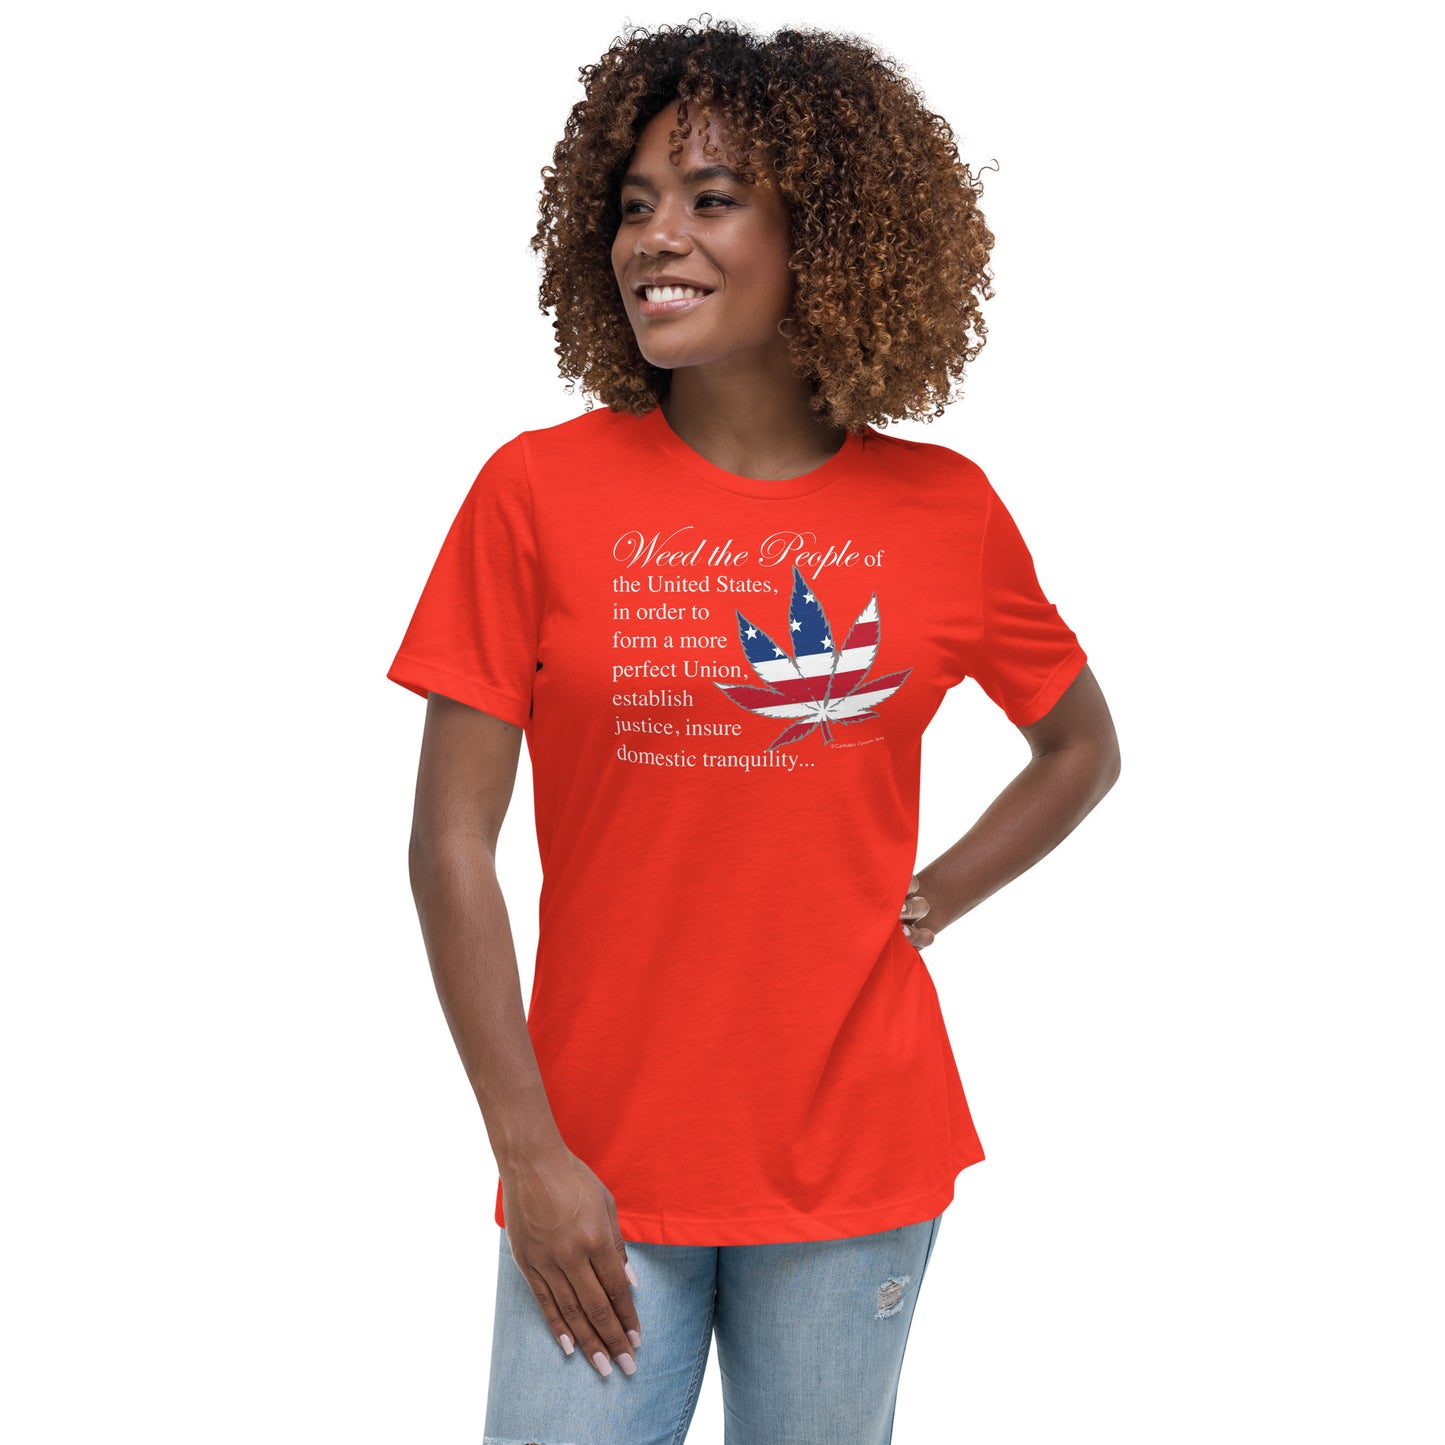 Weed the People (white) Women's Relaxed T-Shirt